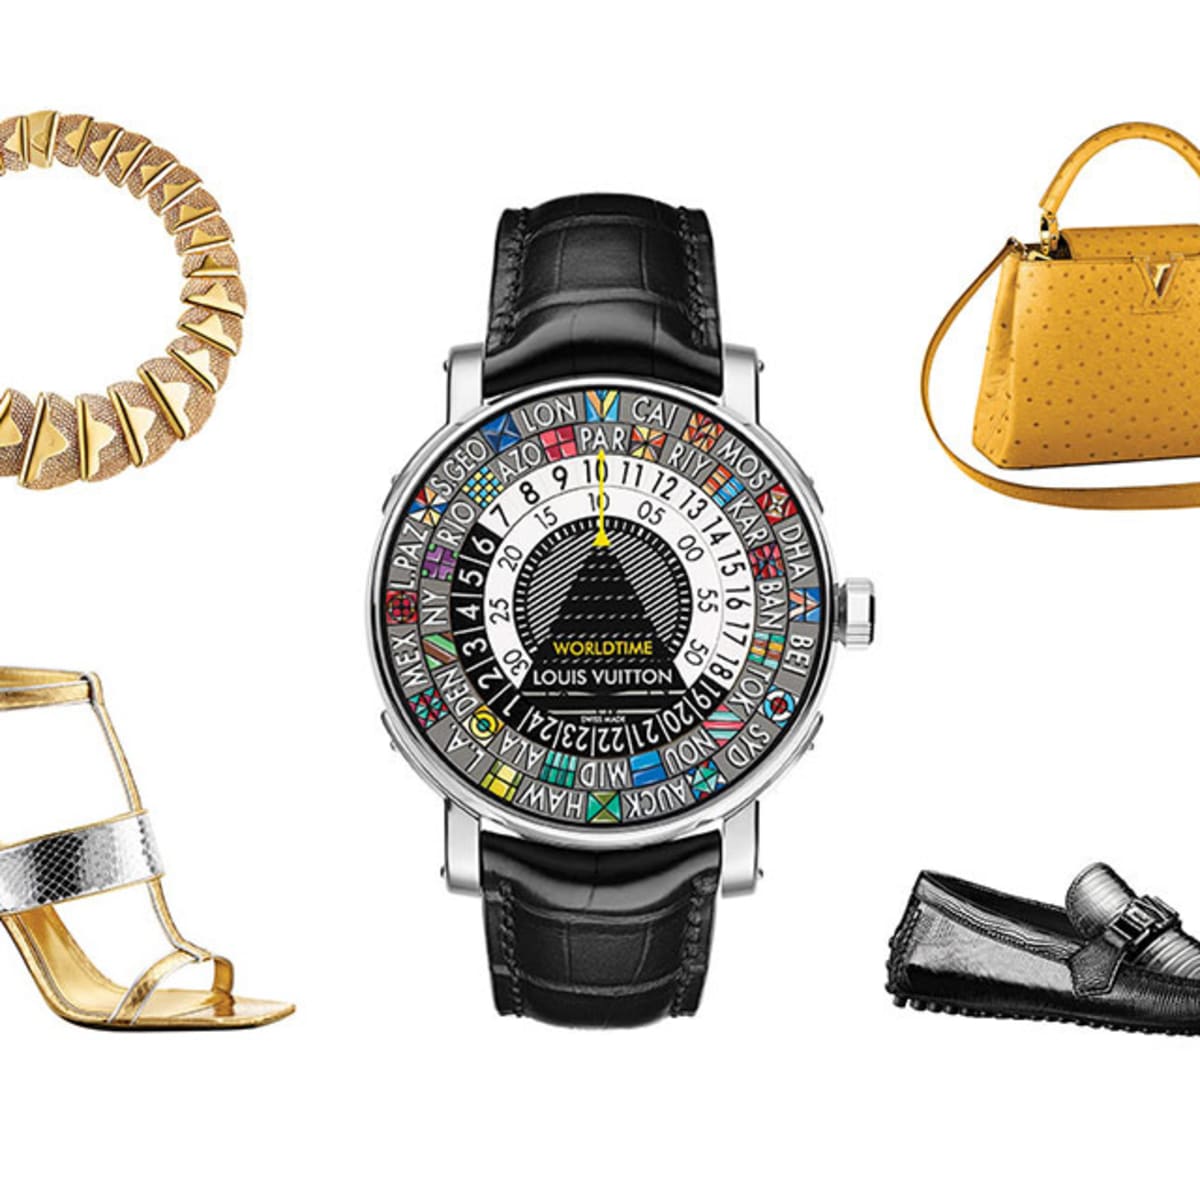 The 10 Most Expensive Louis Vuitton Watches For Women